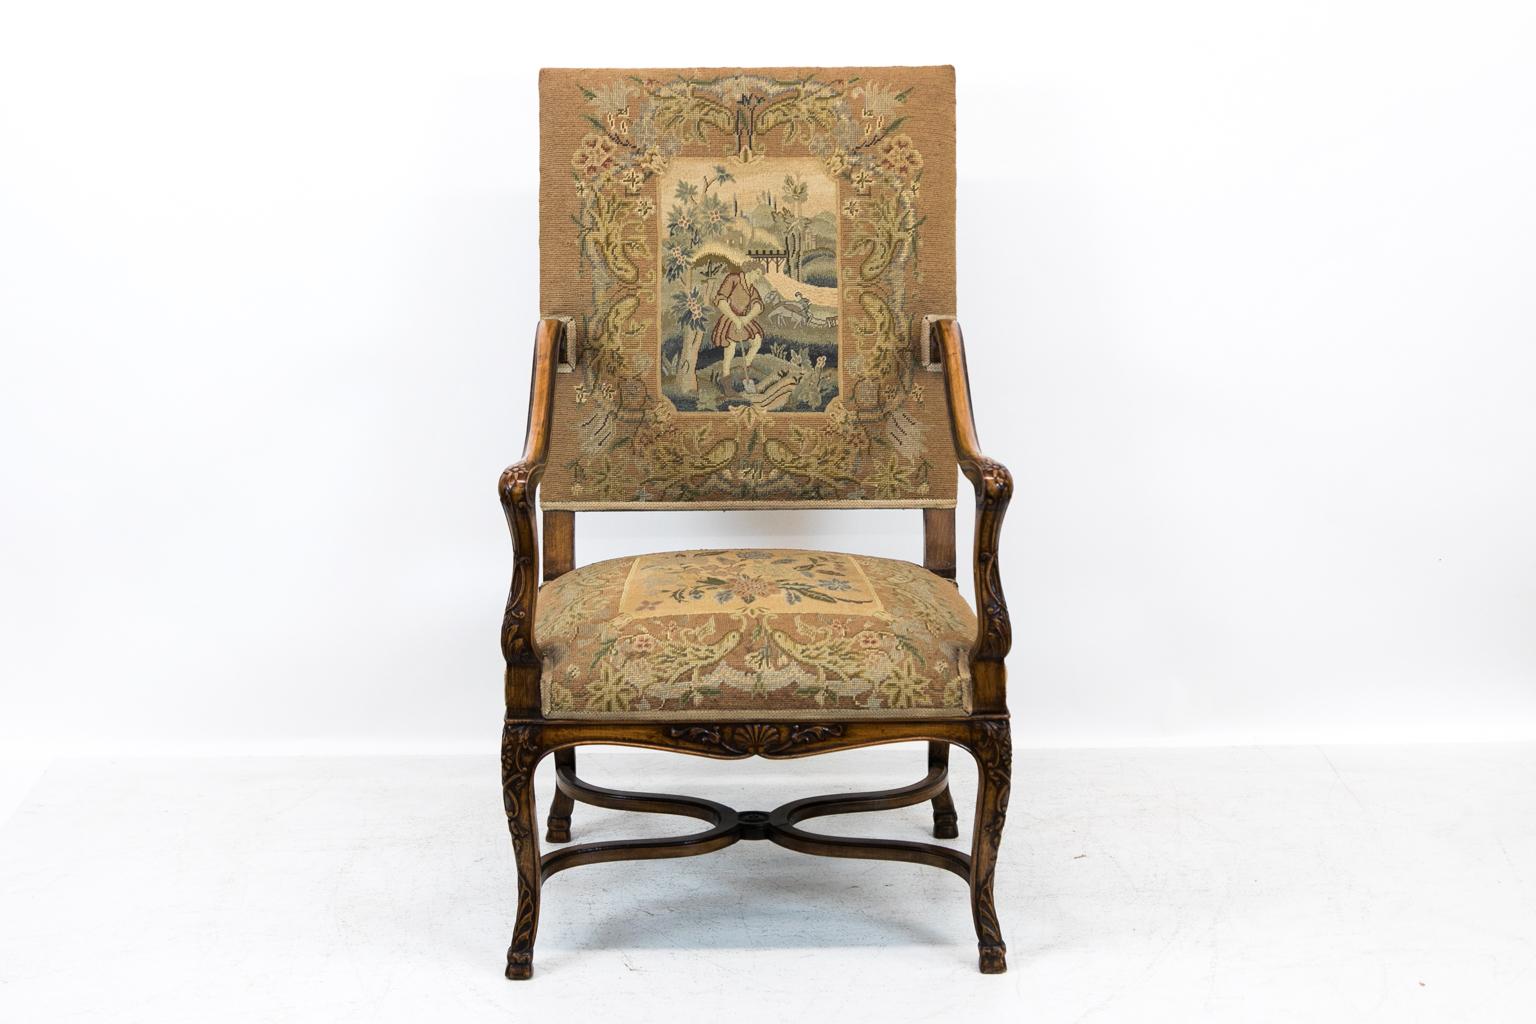 Carved French armchair, has shaped scrolled arms with acanthus carved supports and legs. The center panel is stitched petit point pastoral scenes and flowers. The base has a molded cross stretcher with a floral medallion, and the apron is carved